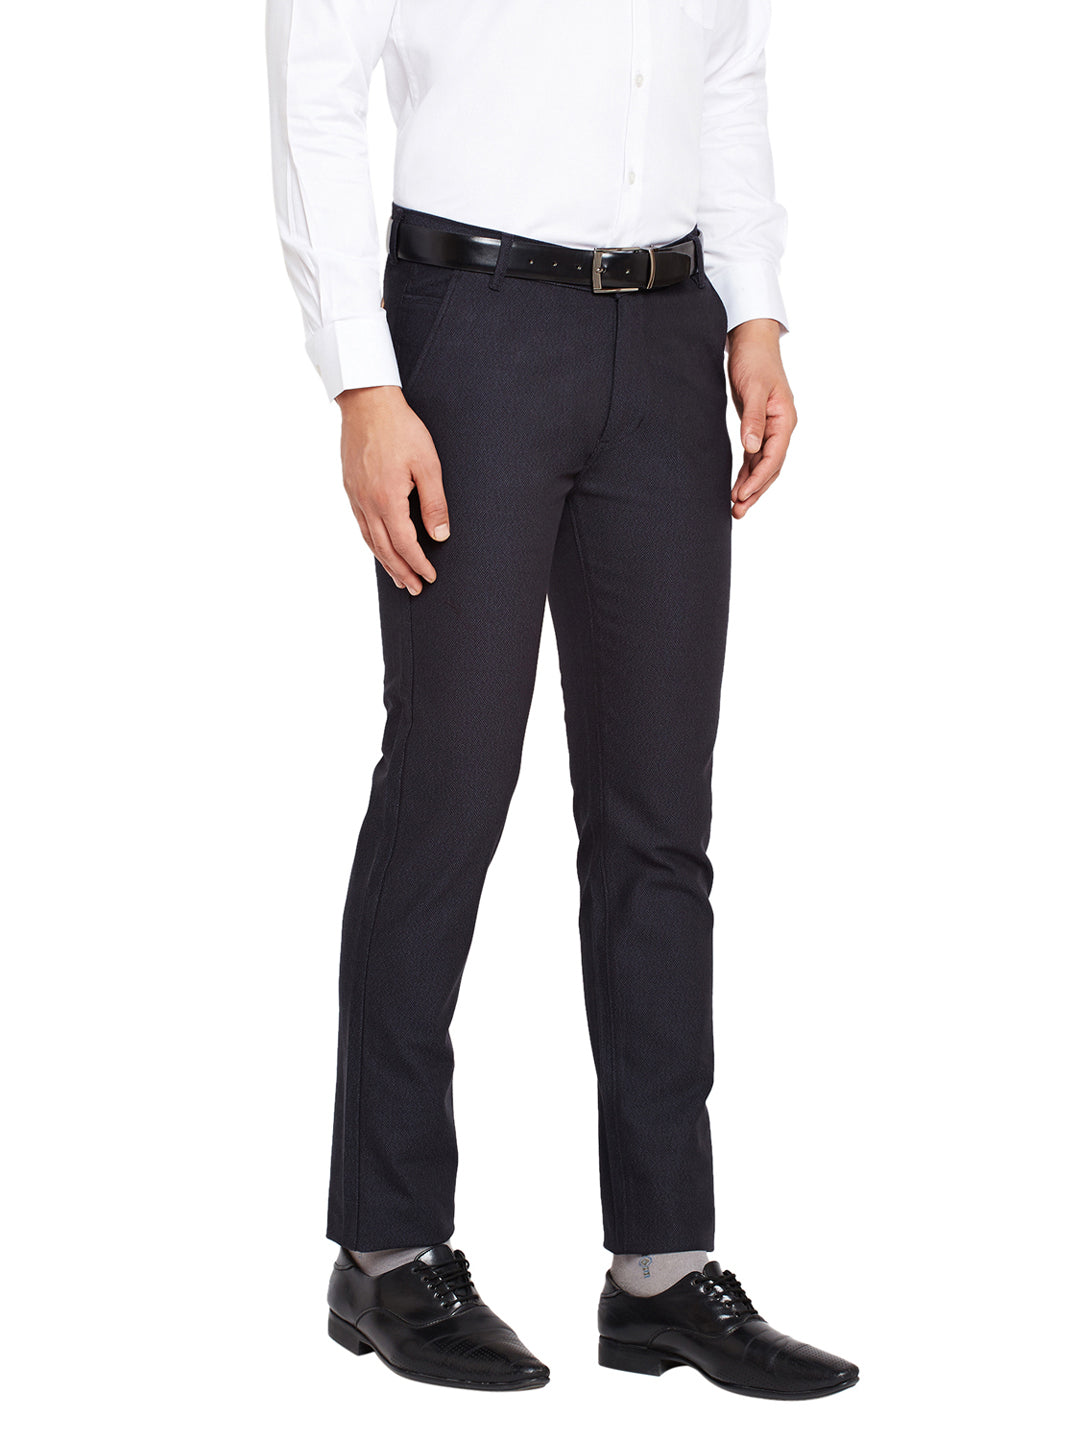 Men Navy Blue Self Design Solid Stretchable Mid Rise Slim Fit Chinos Trouser